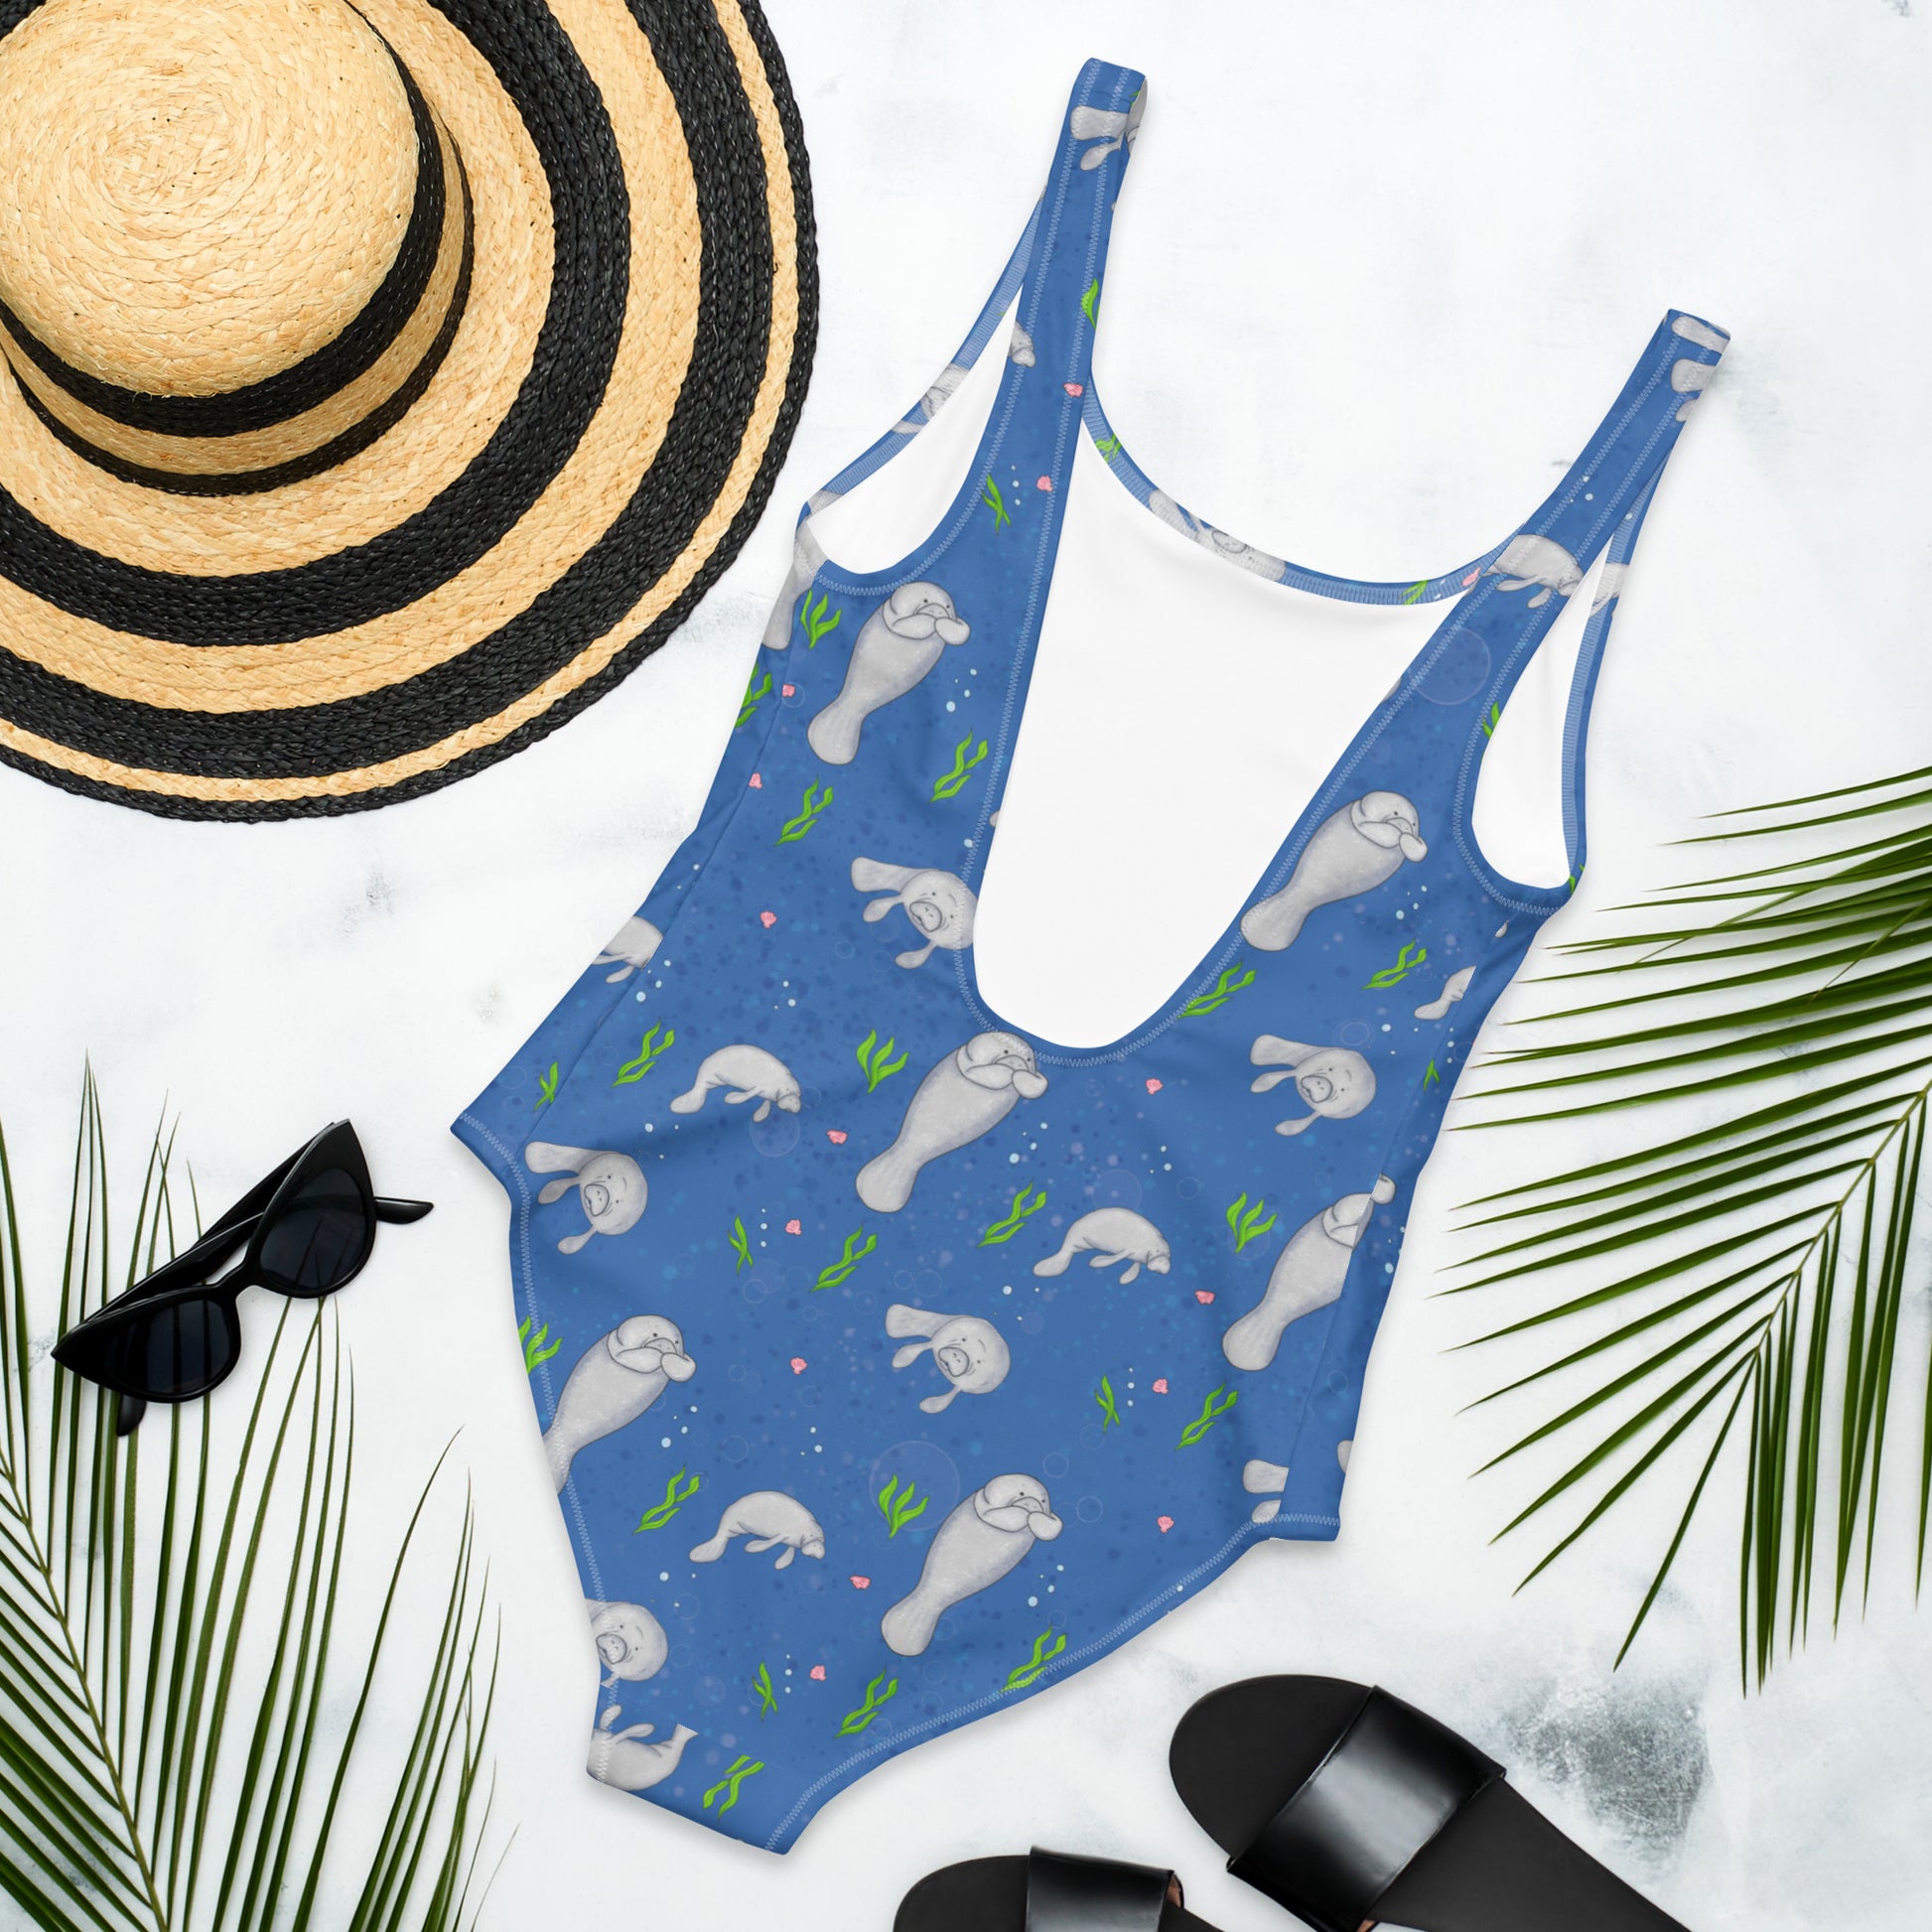 One piece swimsuit made of four-way stretch chlorine-resistant fabric. Features hand-illustrated pattern design of manatees, seaweed, shells, and bubbles on a dark blue background. Available in sizes XS to 3XL. Flat lay view of the back, by a sunhat, sunglasses, sandals and palm leaves.